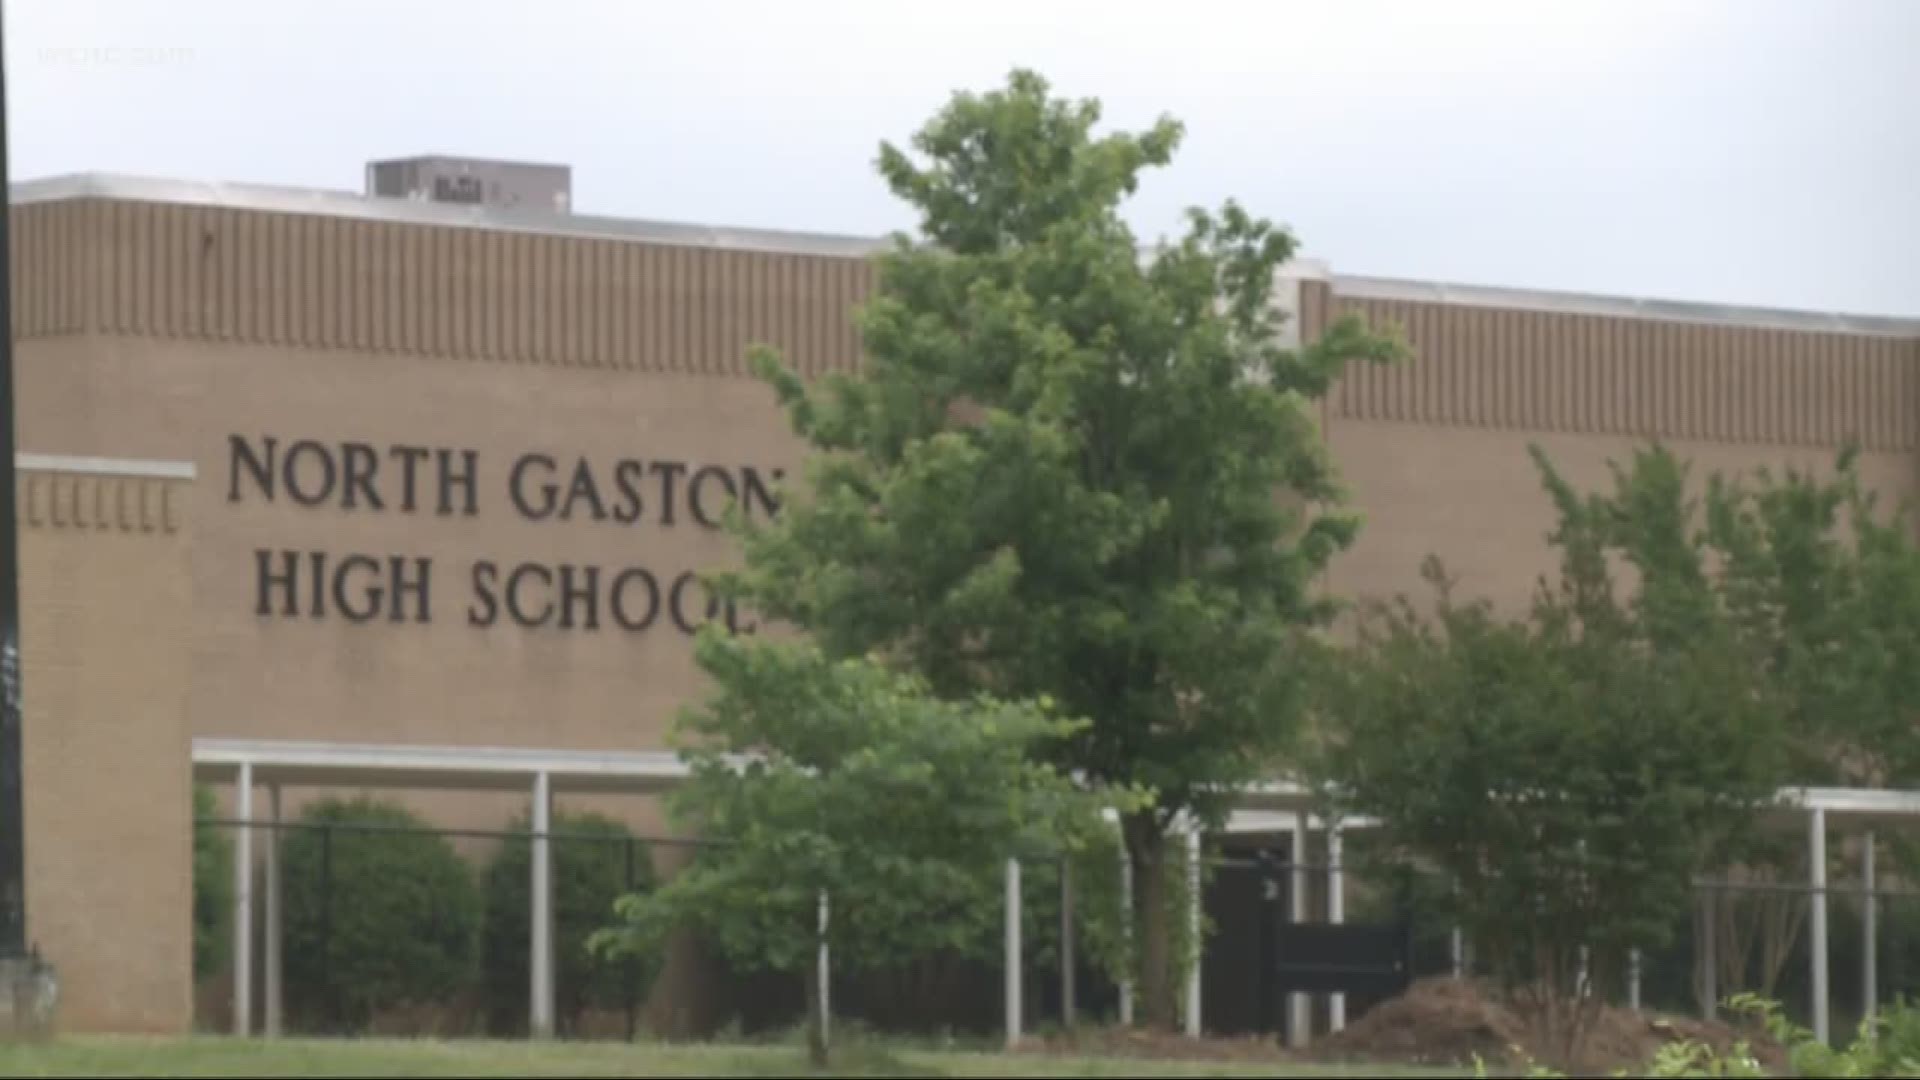 On Tuesday, a Gaston County high school senior was charged with communicating threats of mass violence.